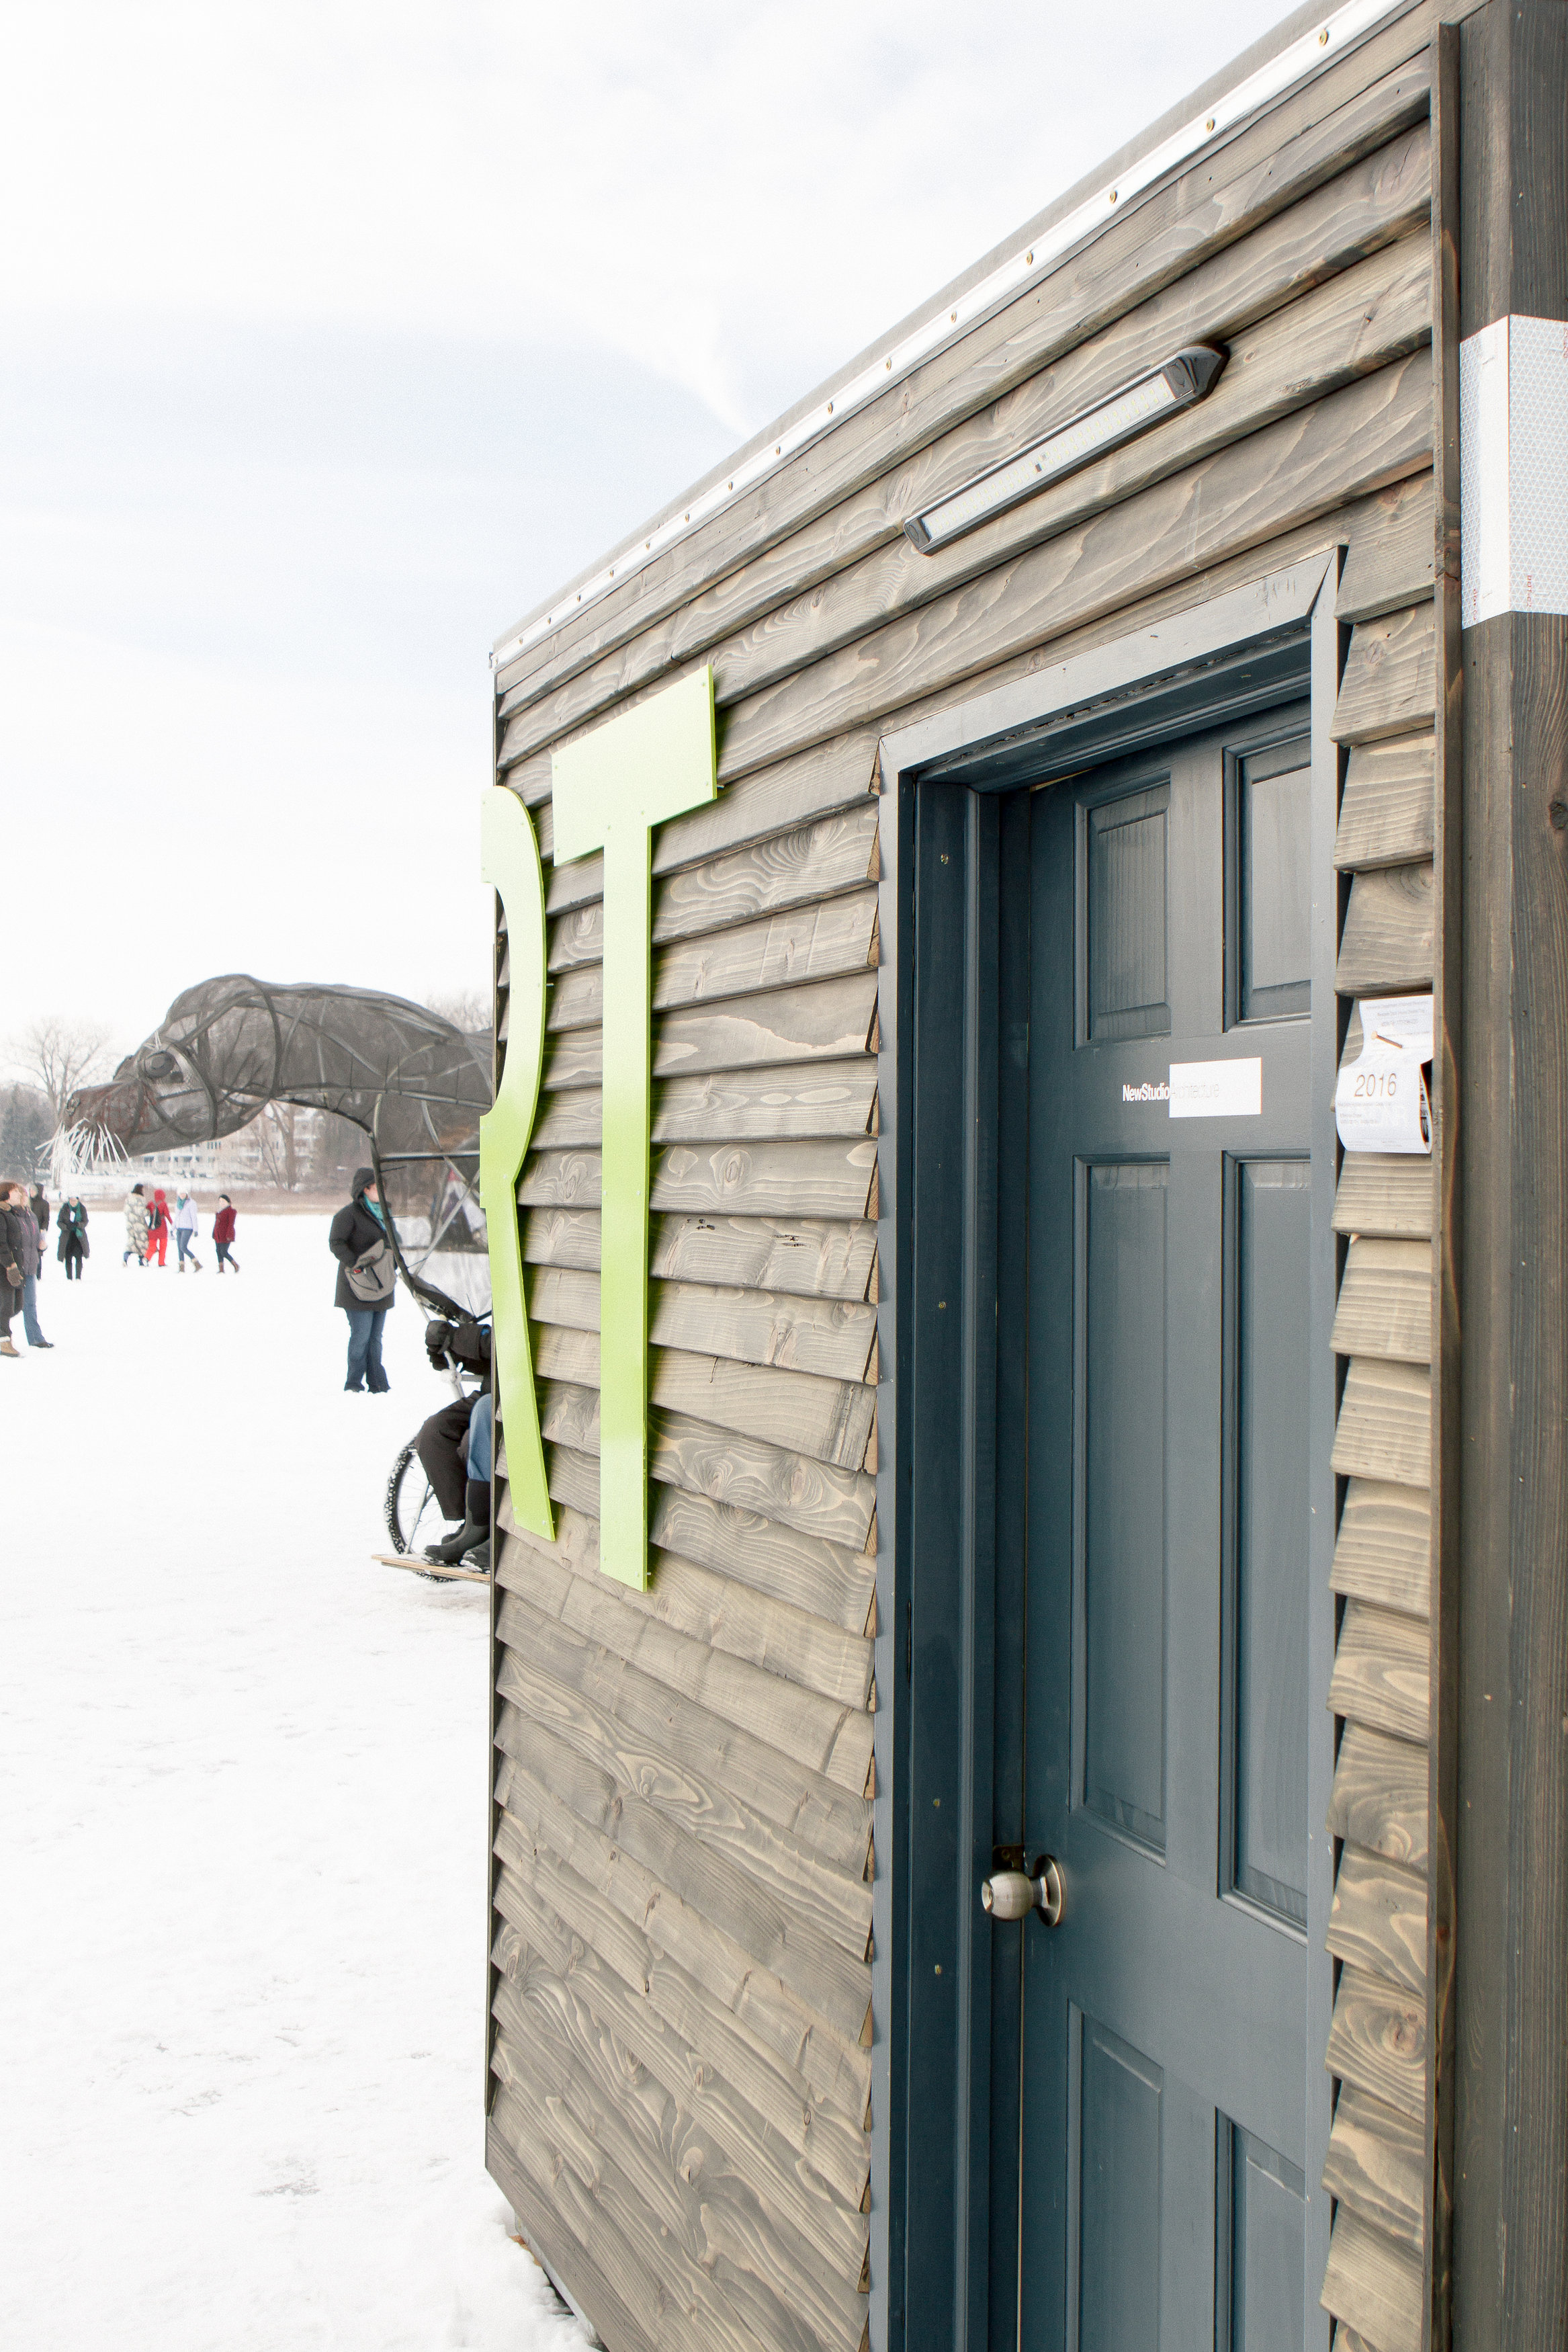 Exterior view of the art shanty designed by NewStudio Architecture